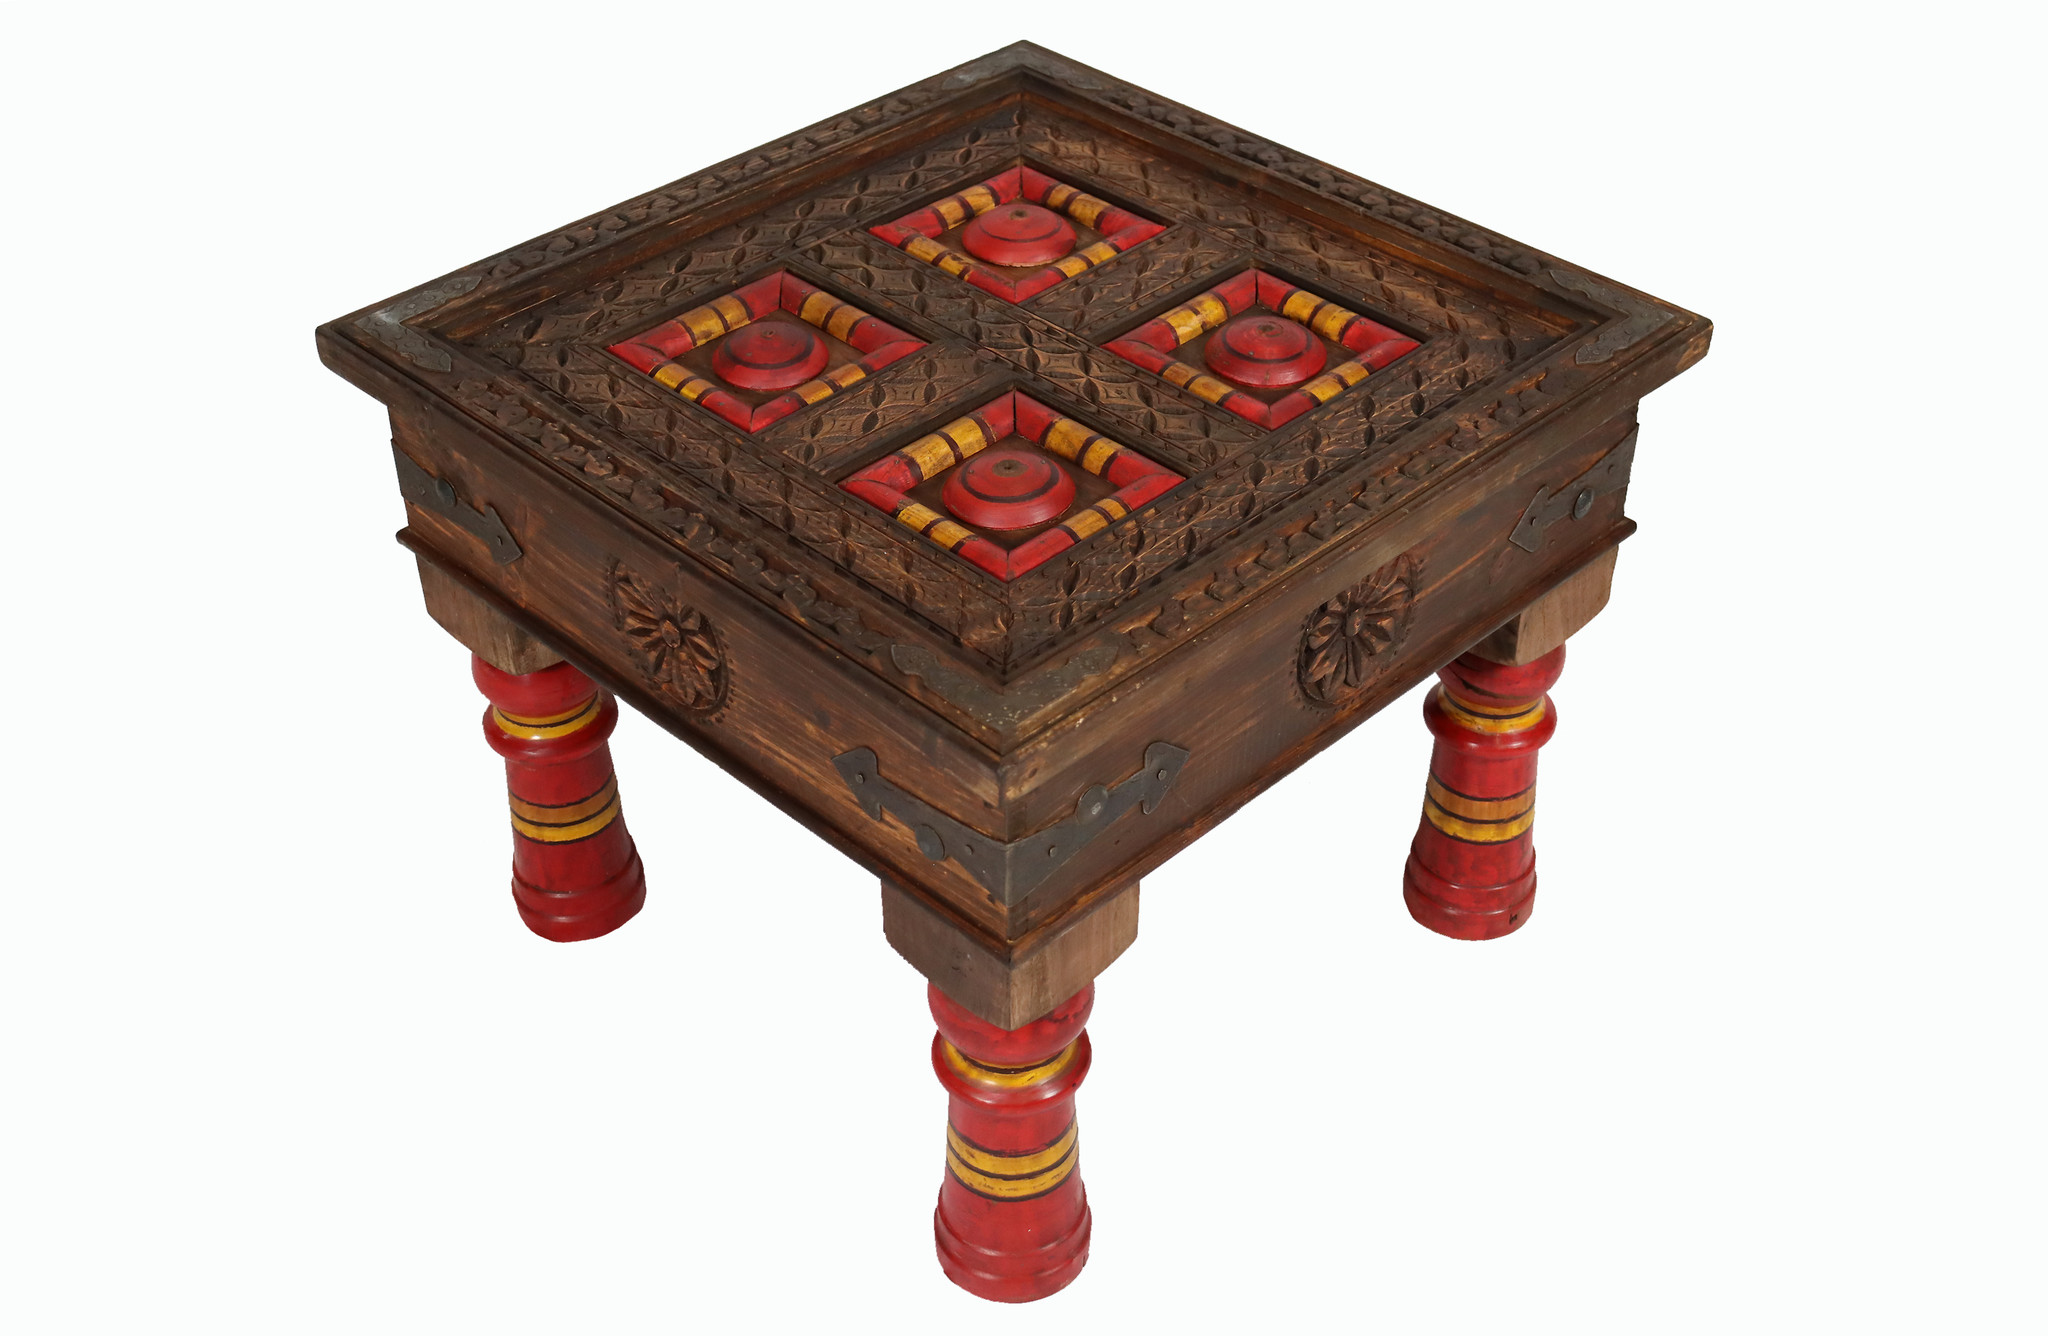 60x60 cm cm antique-look orient colonial solid wood hand-carved  table  Coffee Table living room table  from Afghanistan nuristan PJ